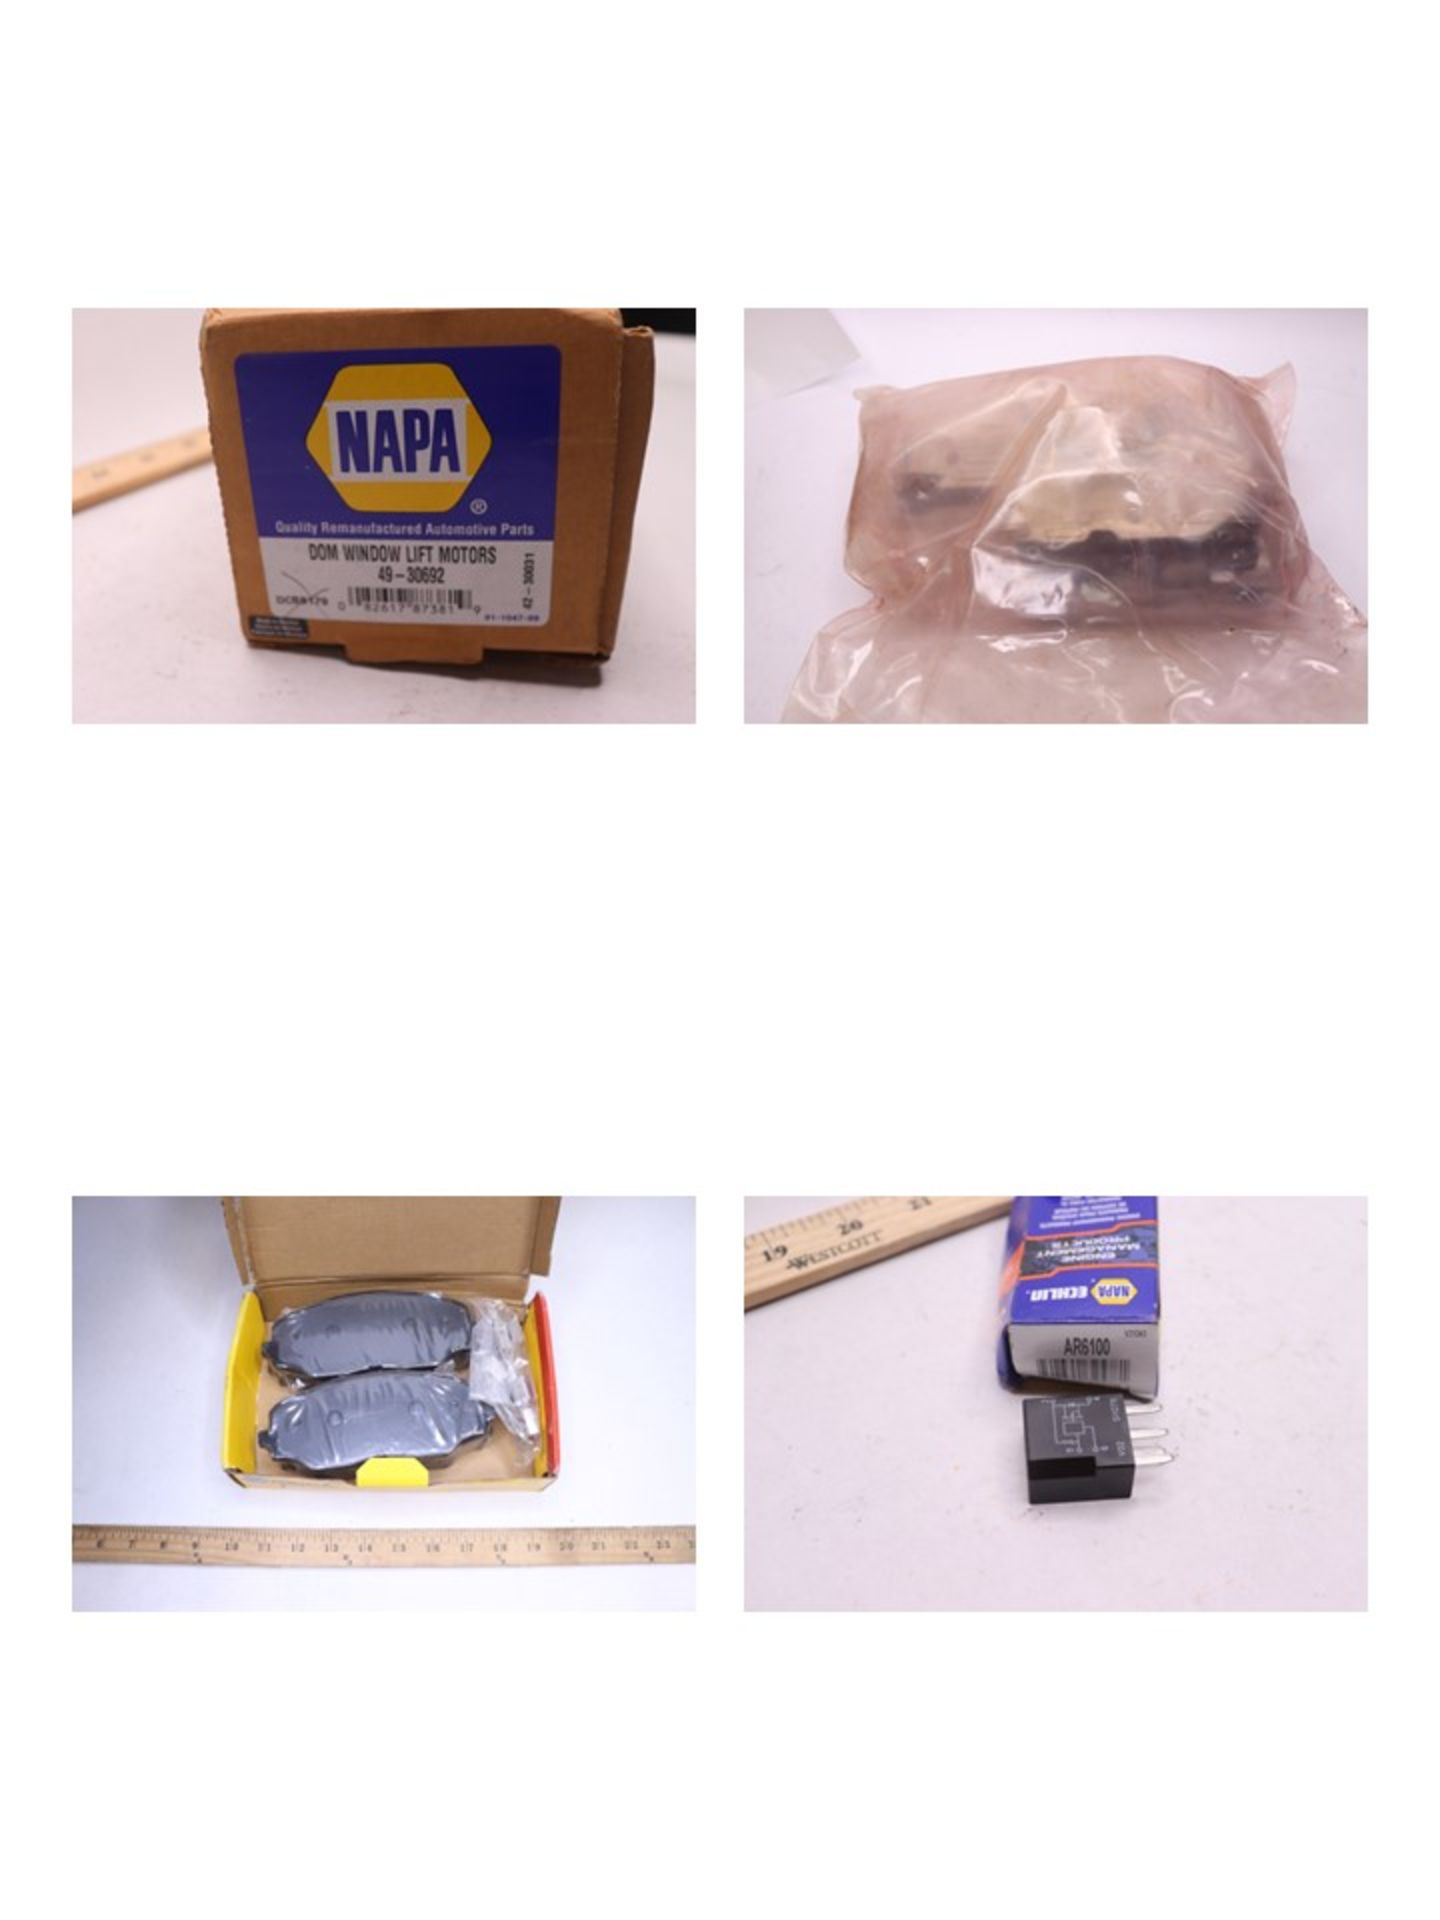 {LOT} 30k Retail Value of "NAPA AUTO PARTS" Items with 385 SKU's and 710+ Piece Quantity - Mostly - Image 23 of 113